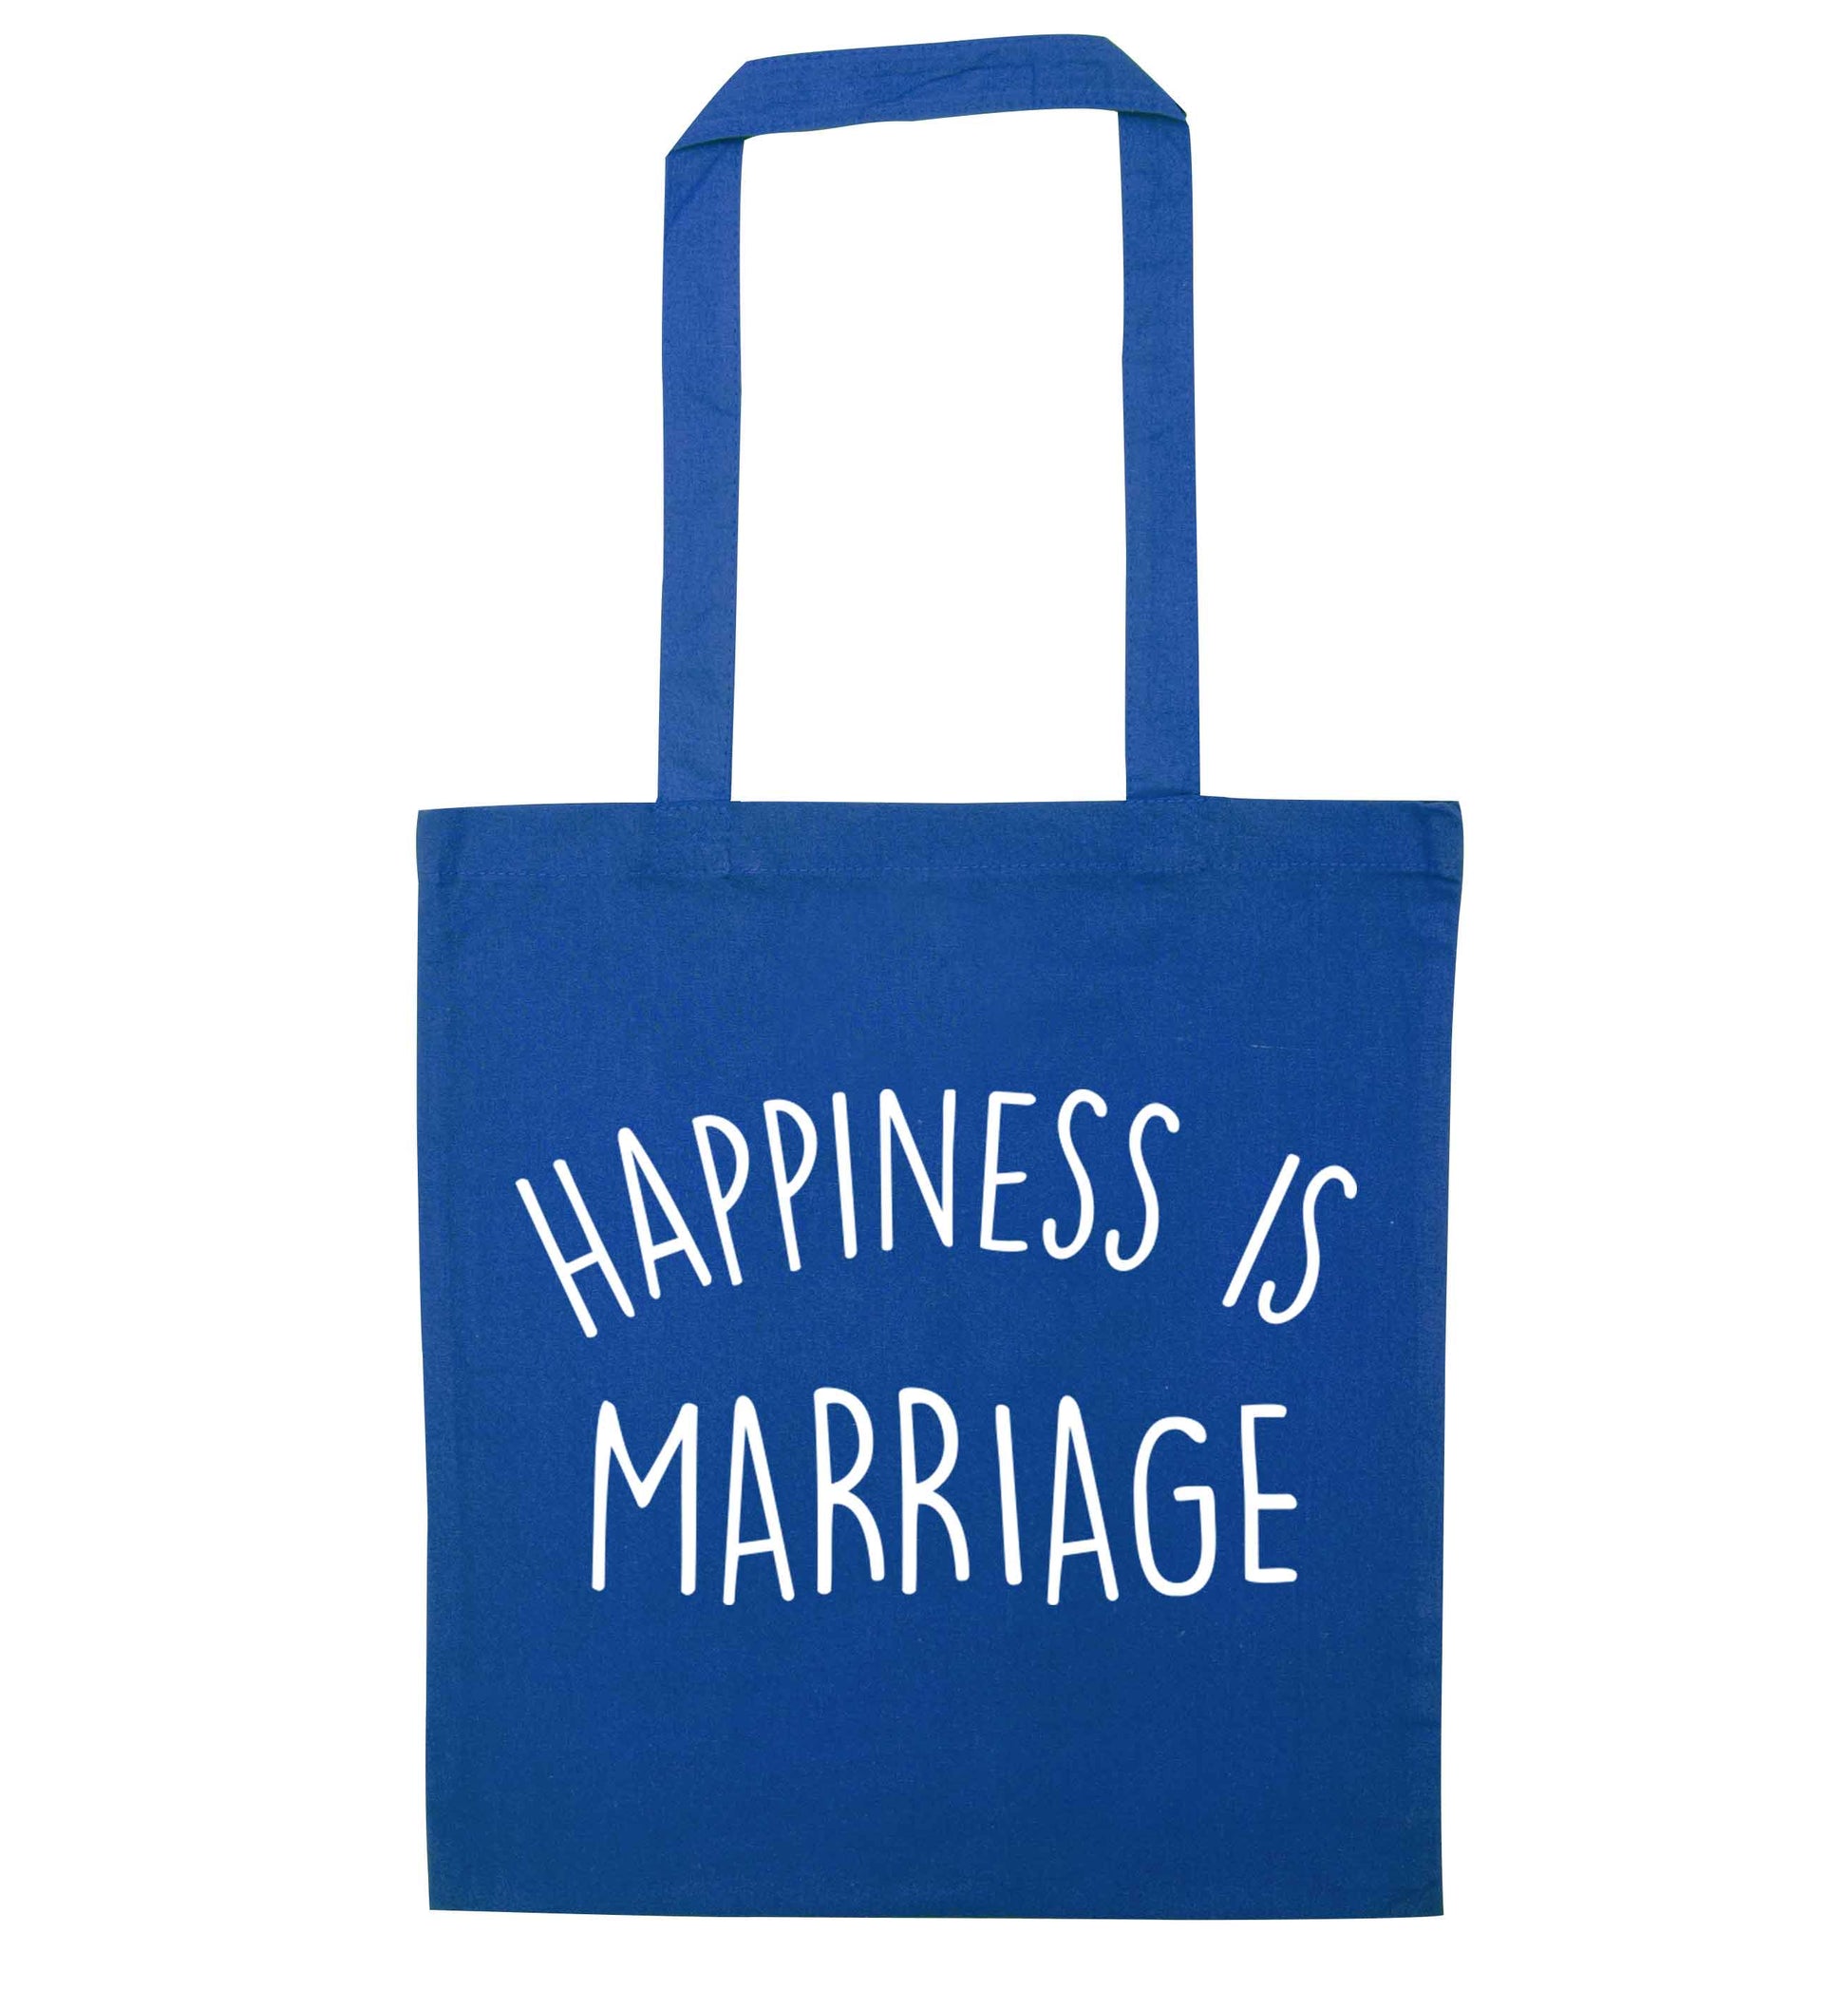 Happiness is wedding planning blue tote bag